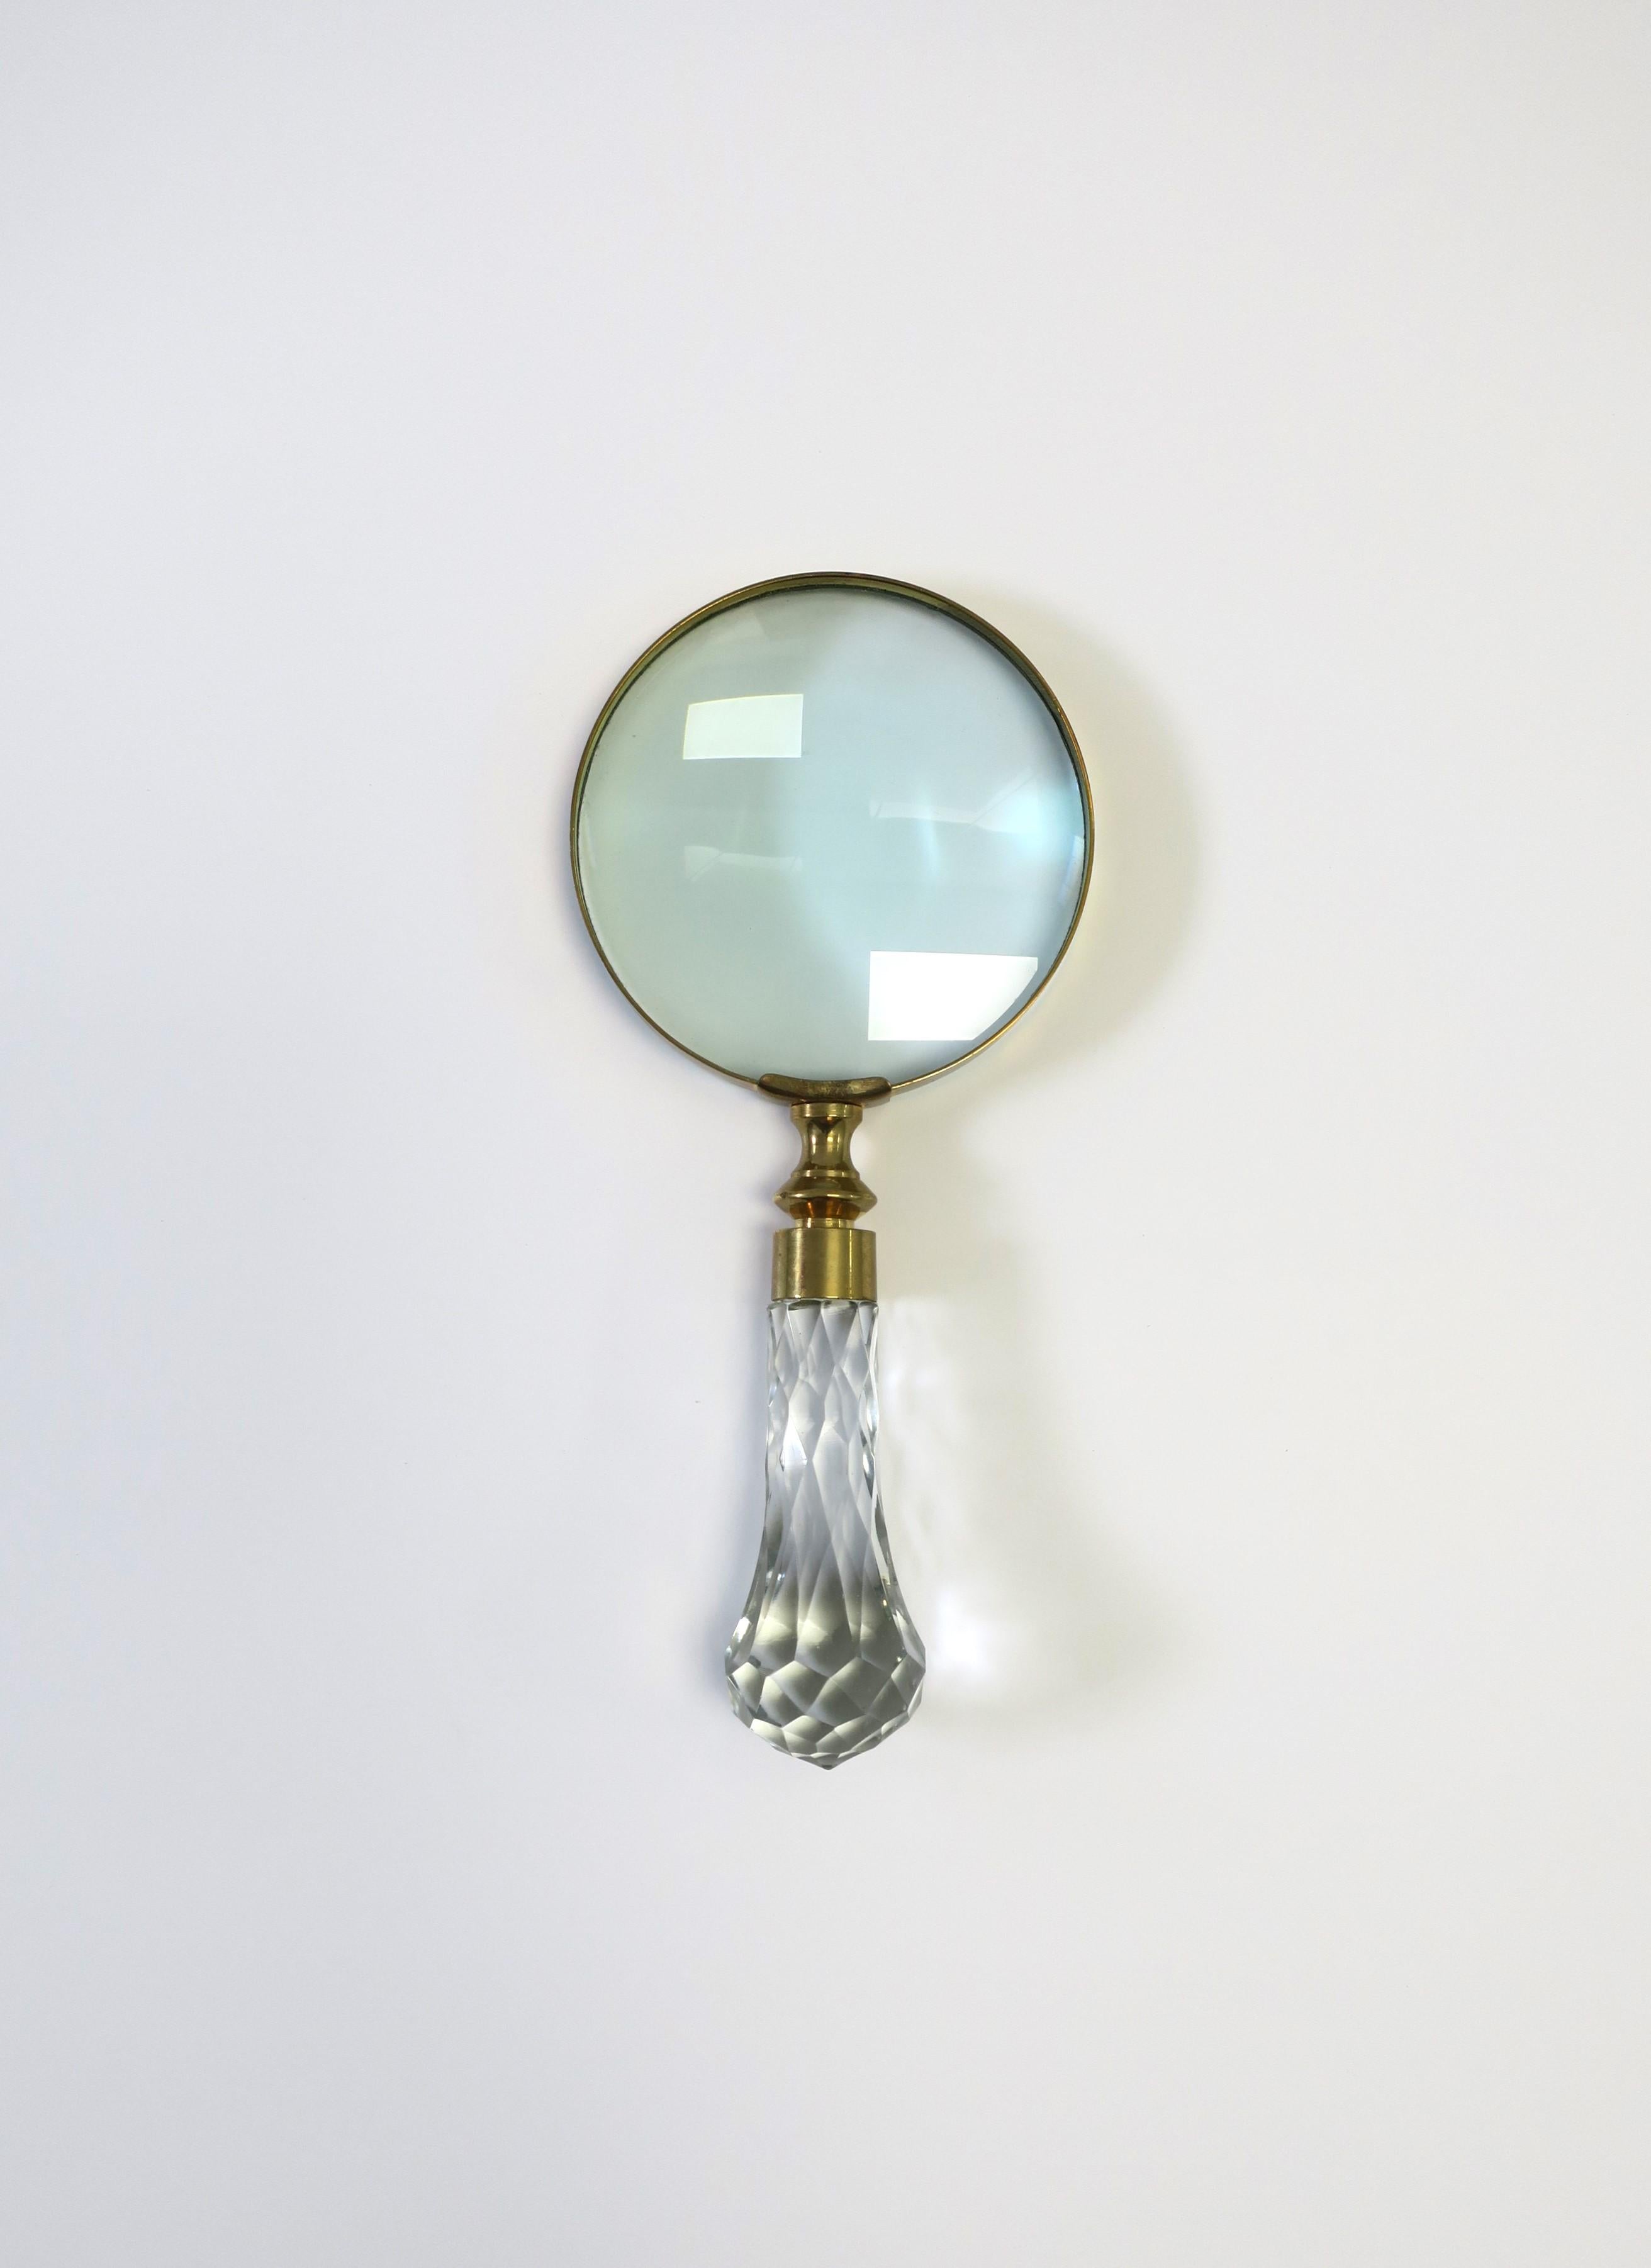 A beautiful and substantial crystal and brass magnifying glass, circa mid to late-20th century. Piece has a beautiful, faceted crystal handle with brass hardware. A great piece for a desk, office, library, etc. Dimensions: 1.5